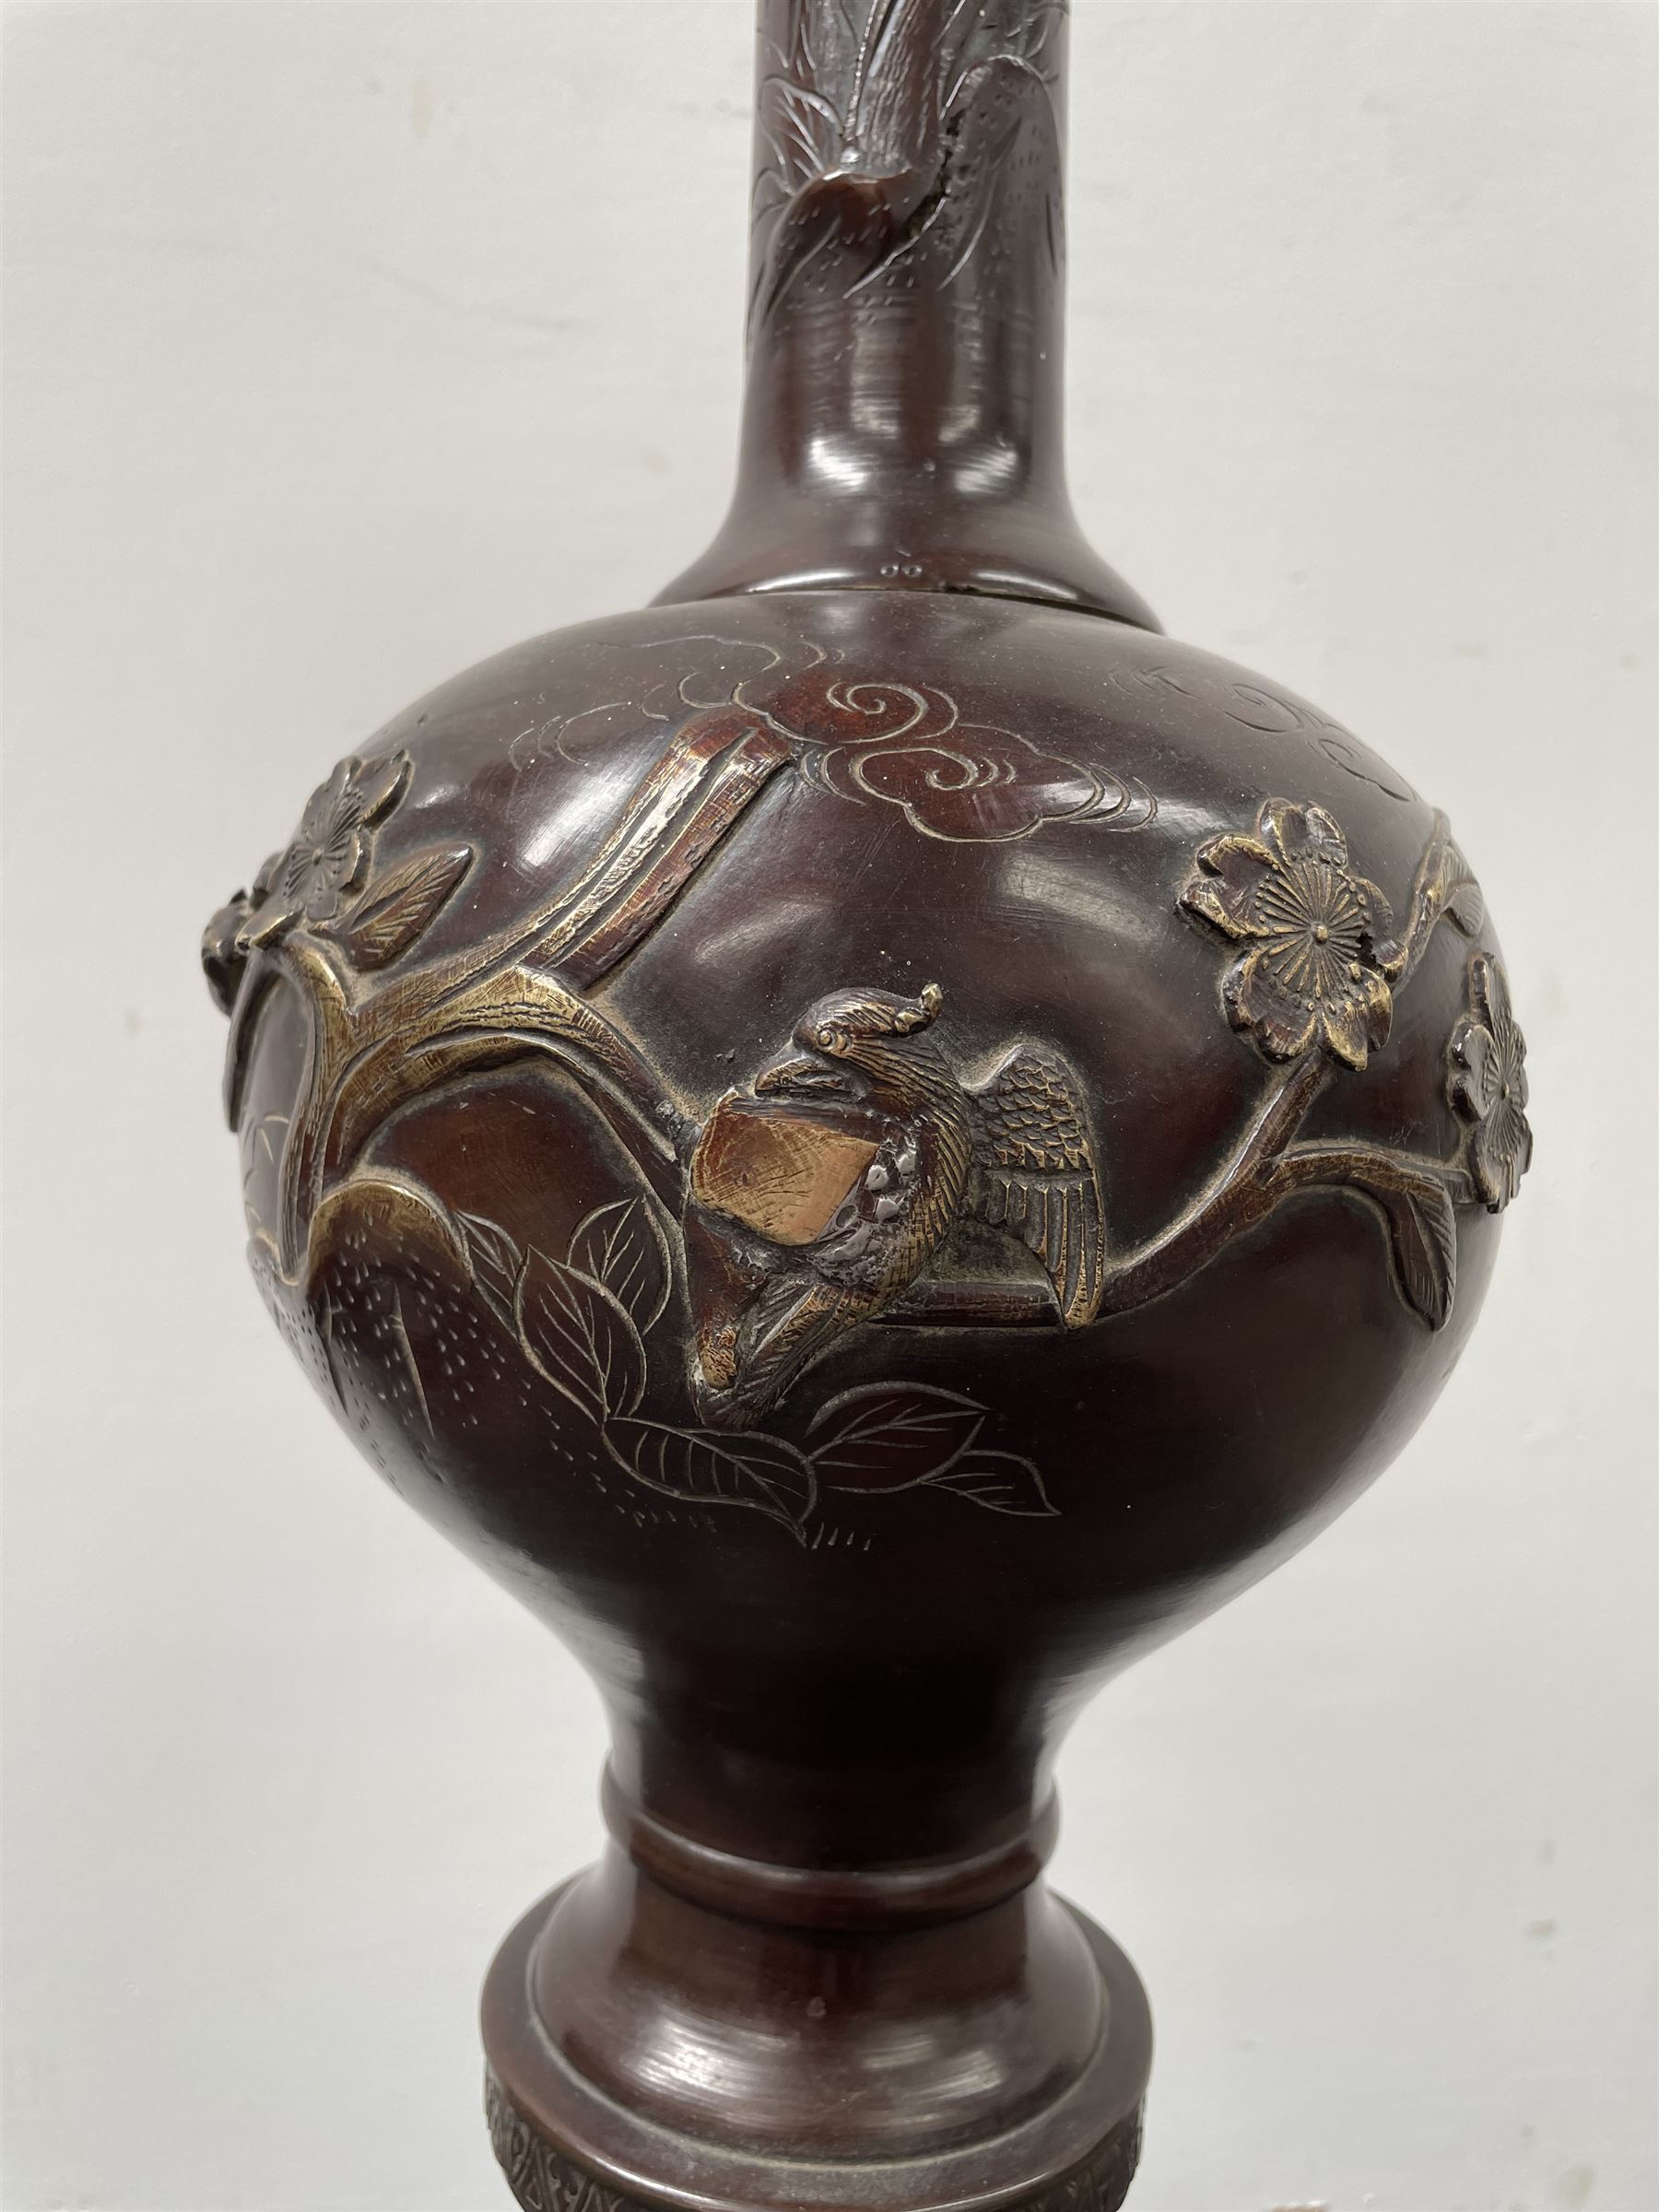 Early 20th century Japanese bronze standard lamp of baluster design decorated with a raised pattern - Image 2 of 3